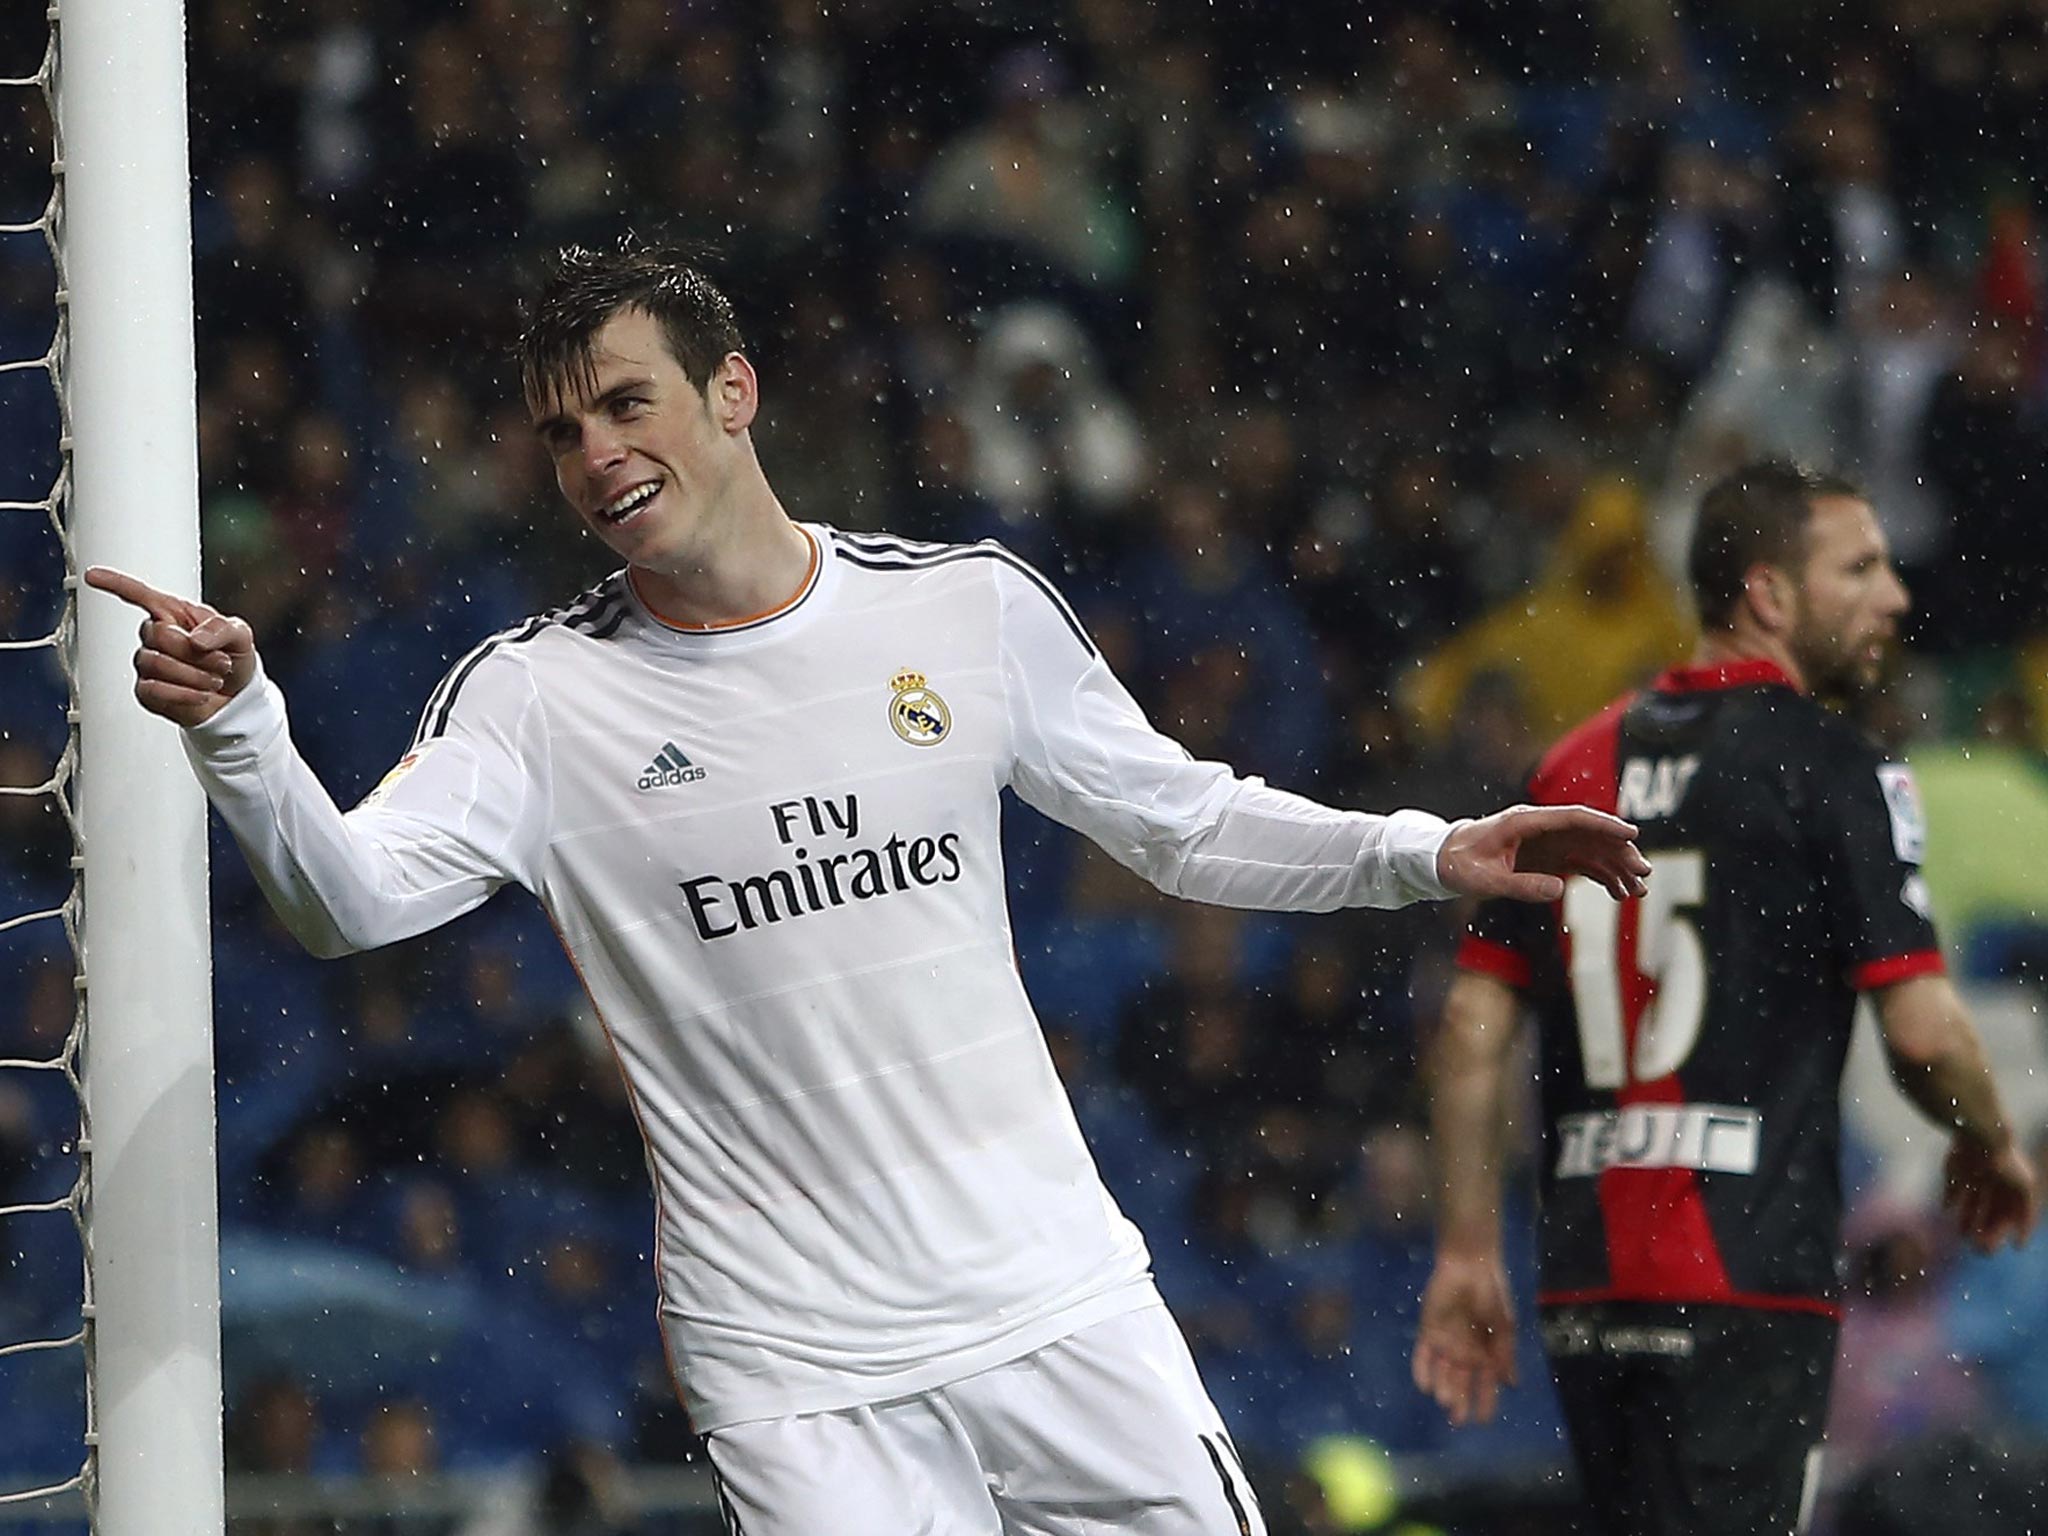 Gareth Bale will be featuring for Real Madrid in the Champions League semi-finals